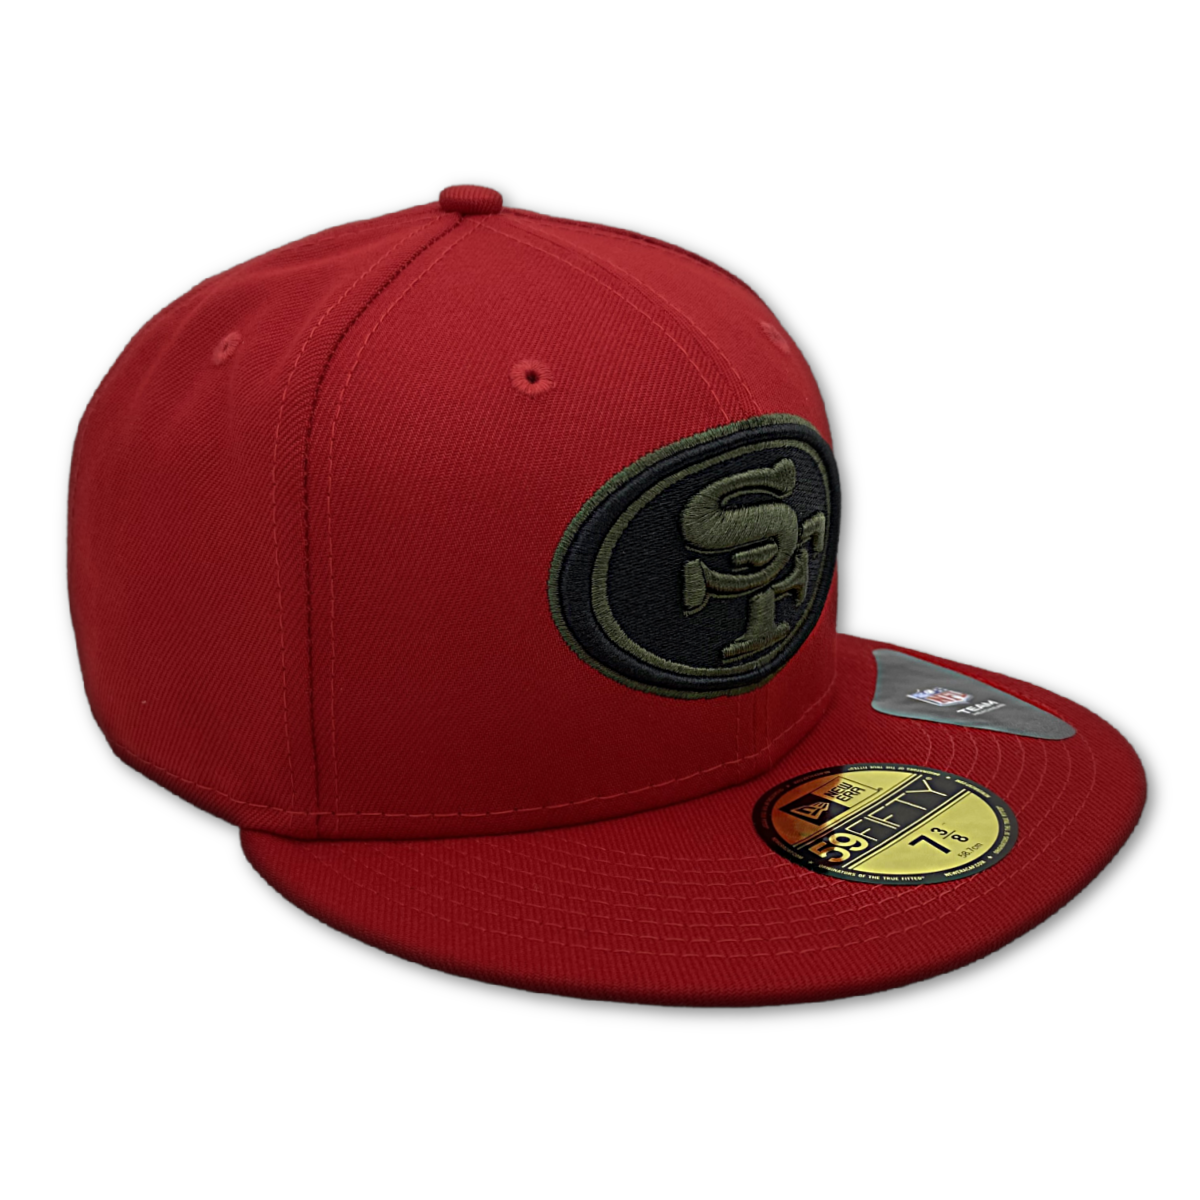 SAN FRANCISCO GIANTS NEW ERA WOOD CAMO 59FIFTY FITTED HAT nvsoccer.com The Coliseum